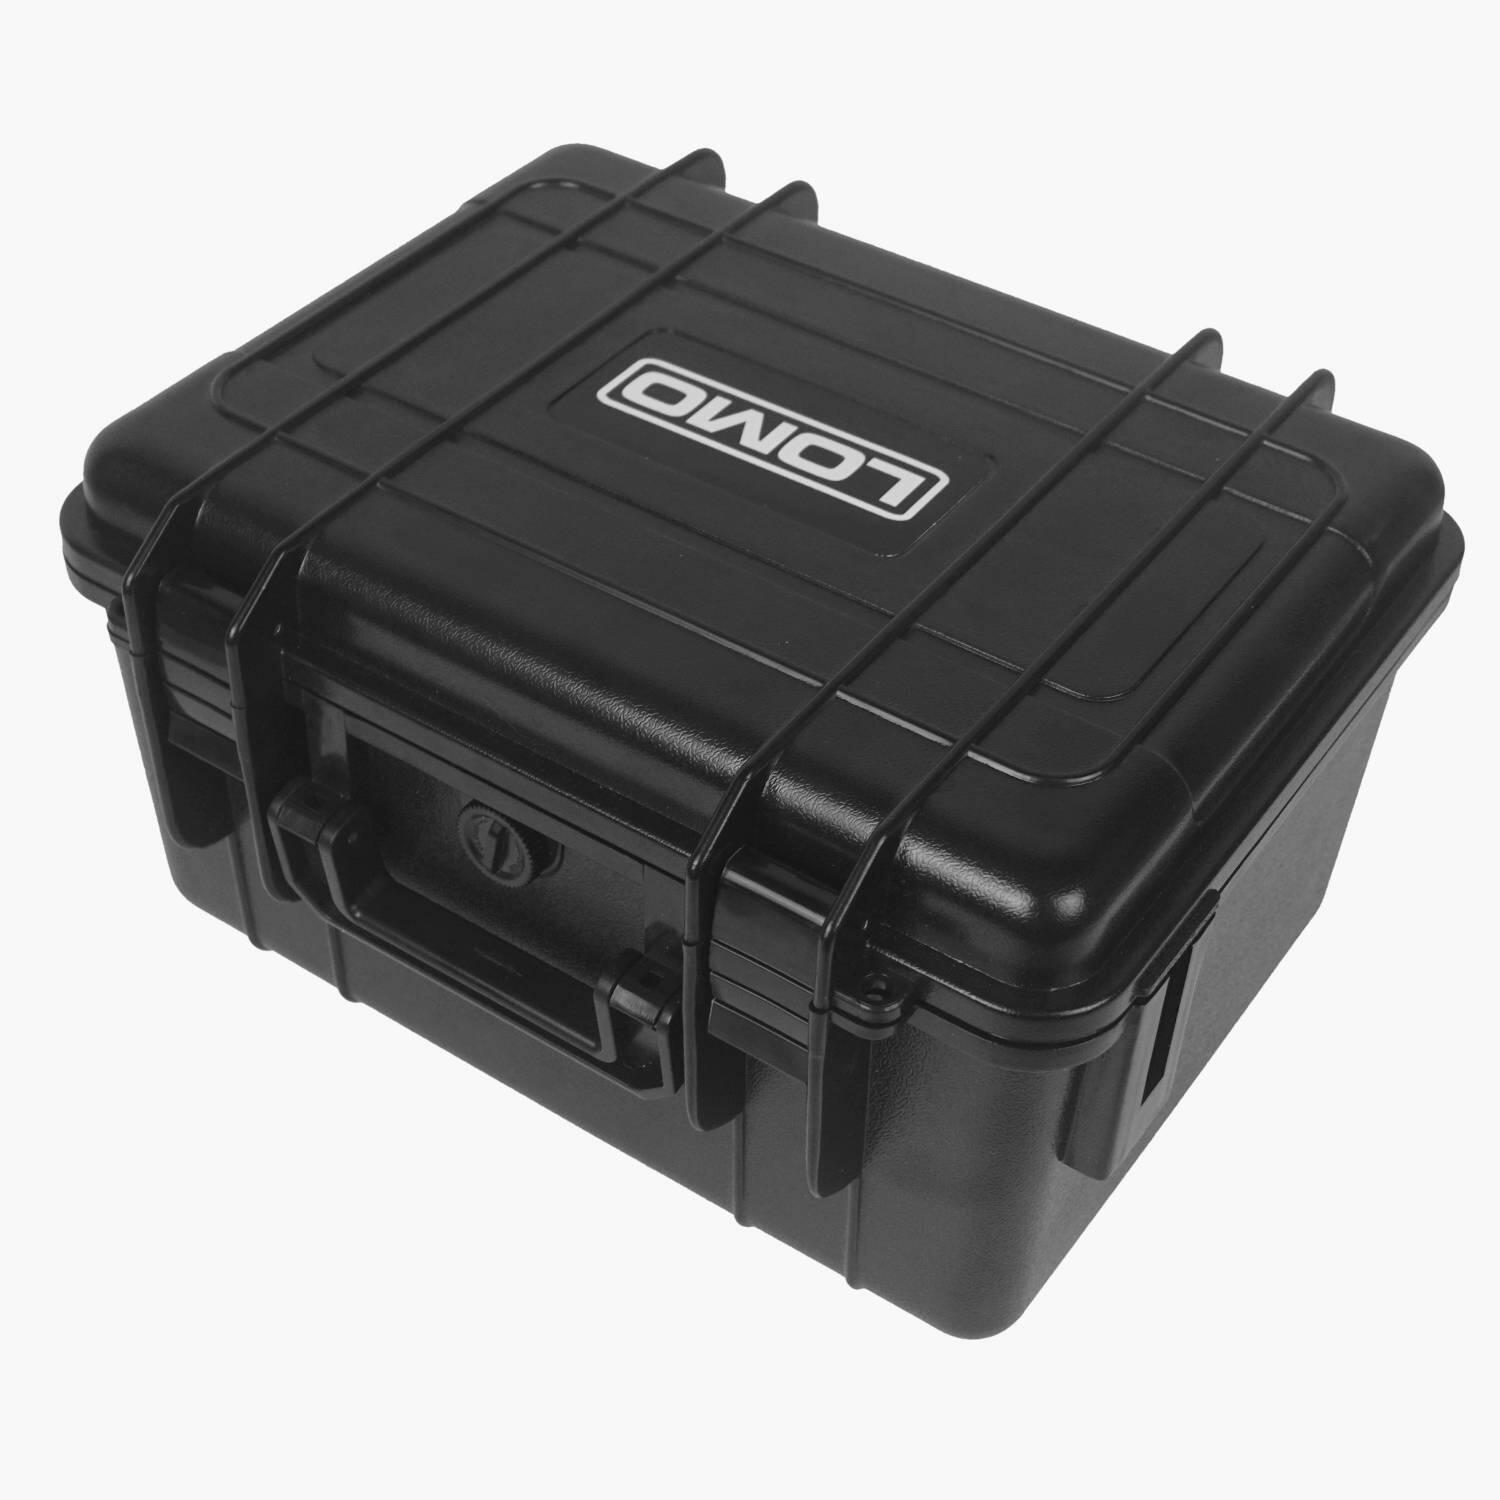 LOMO Lomo DB2 - Protective Case Dry Box with Cubed Foam